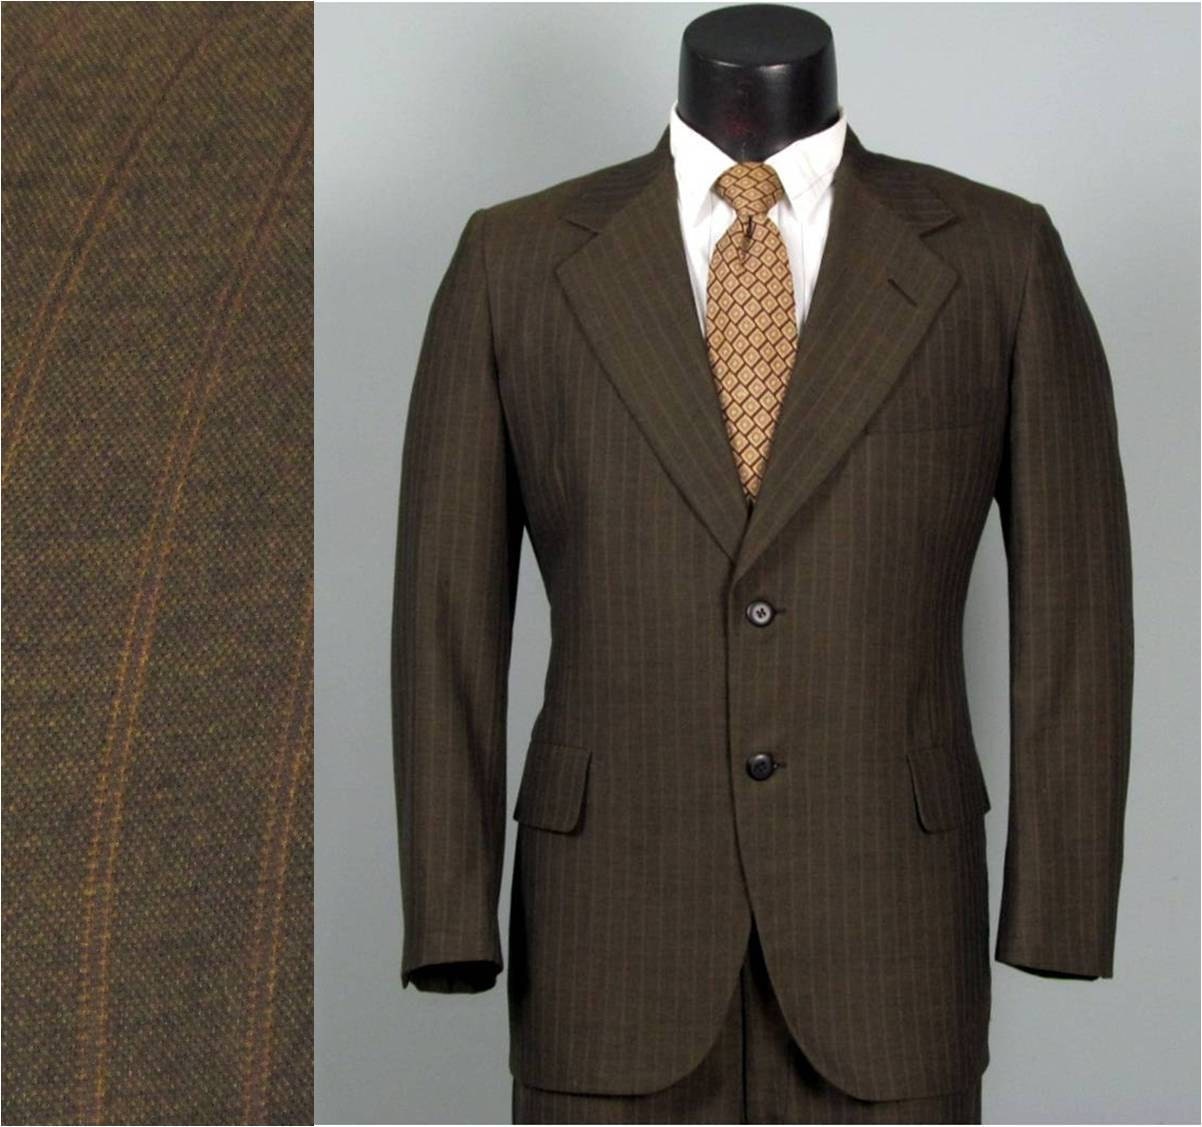 Vintage Mens Suit 1960s Chocolate Brown Pinstriped Lightweight 1960s Mens Suits